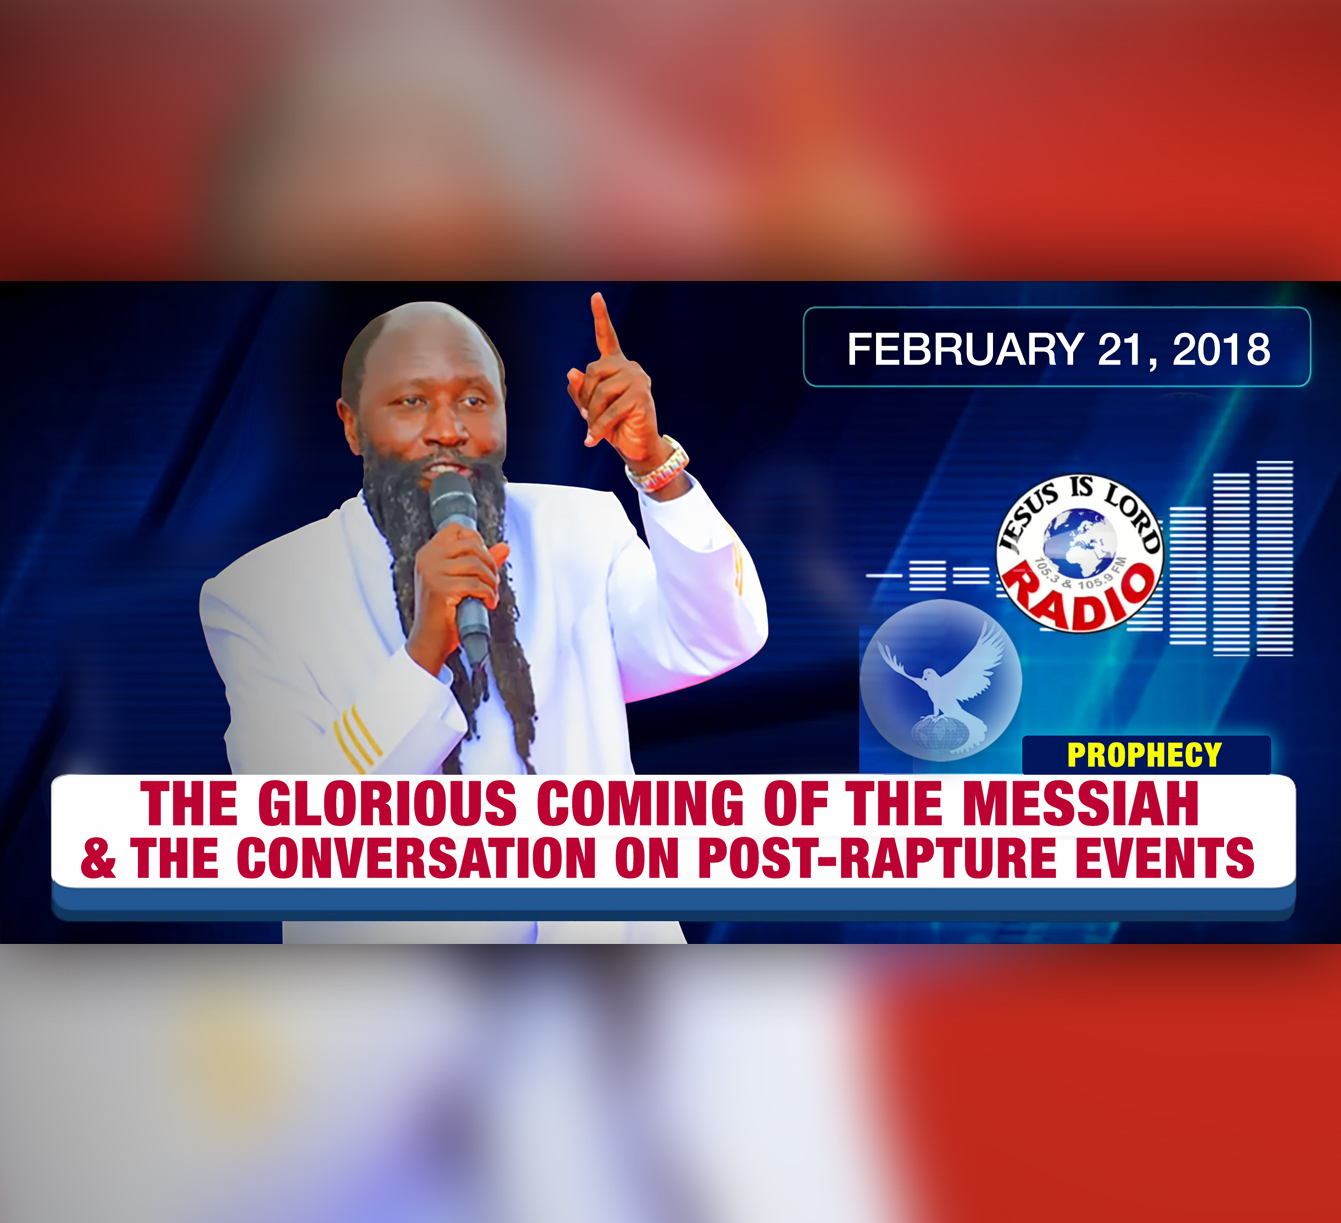 EPISODE 139 - PROPHECY ON THE GLORIOUS COMING OF THE MESSIAH & THE CONVERSATION ON POST-RAPTURE EVENTS (21FEB2018) - PROPHET DR. OWUOR